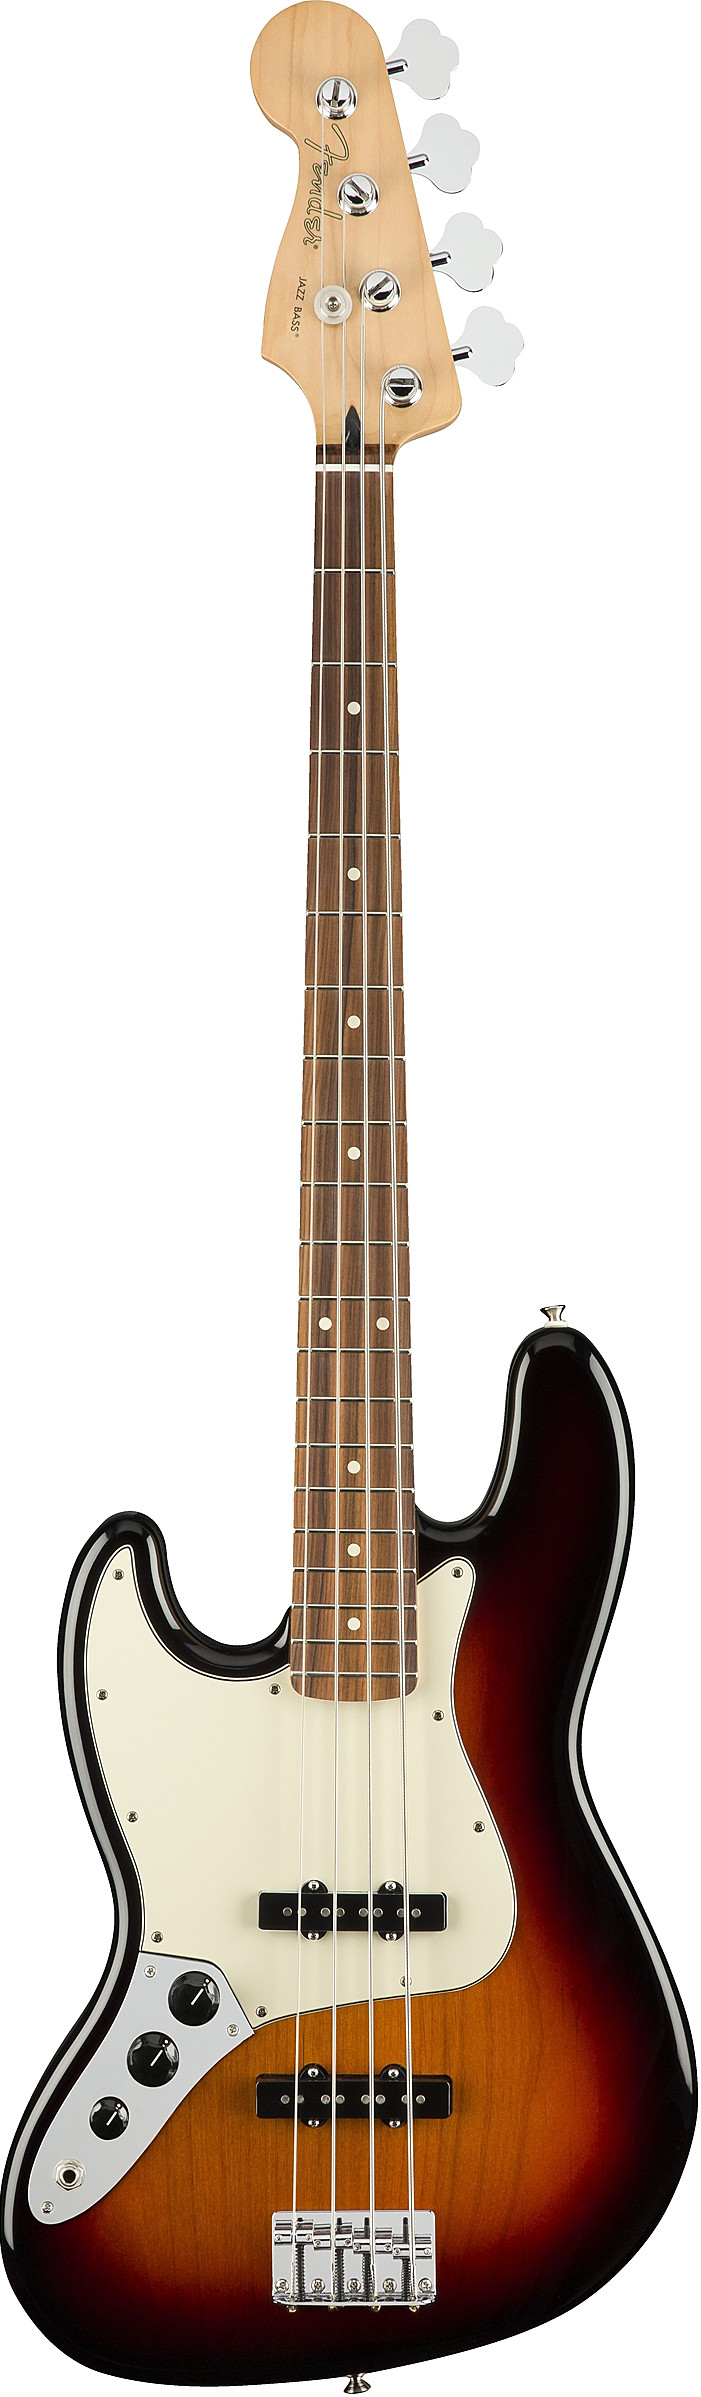 Player Jazz Bass Left-Handed by Fender